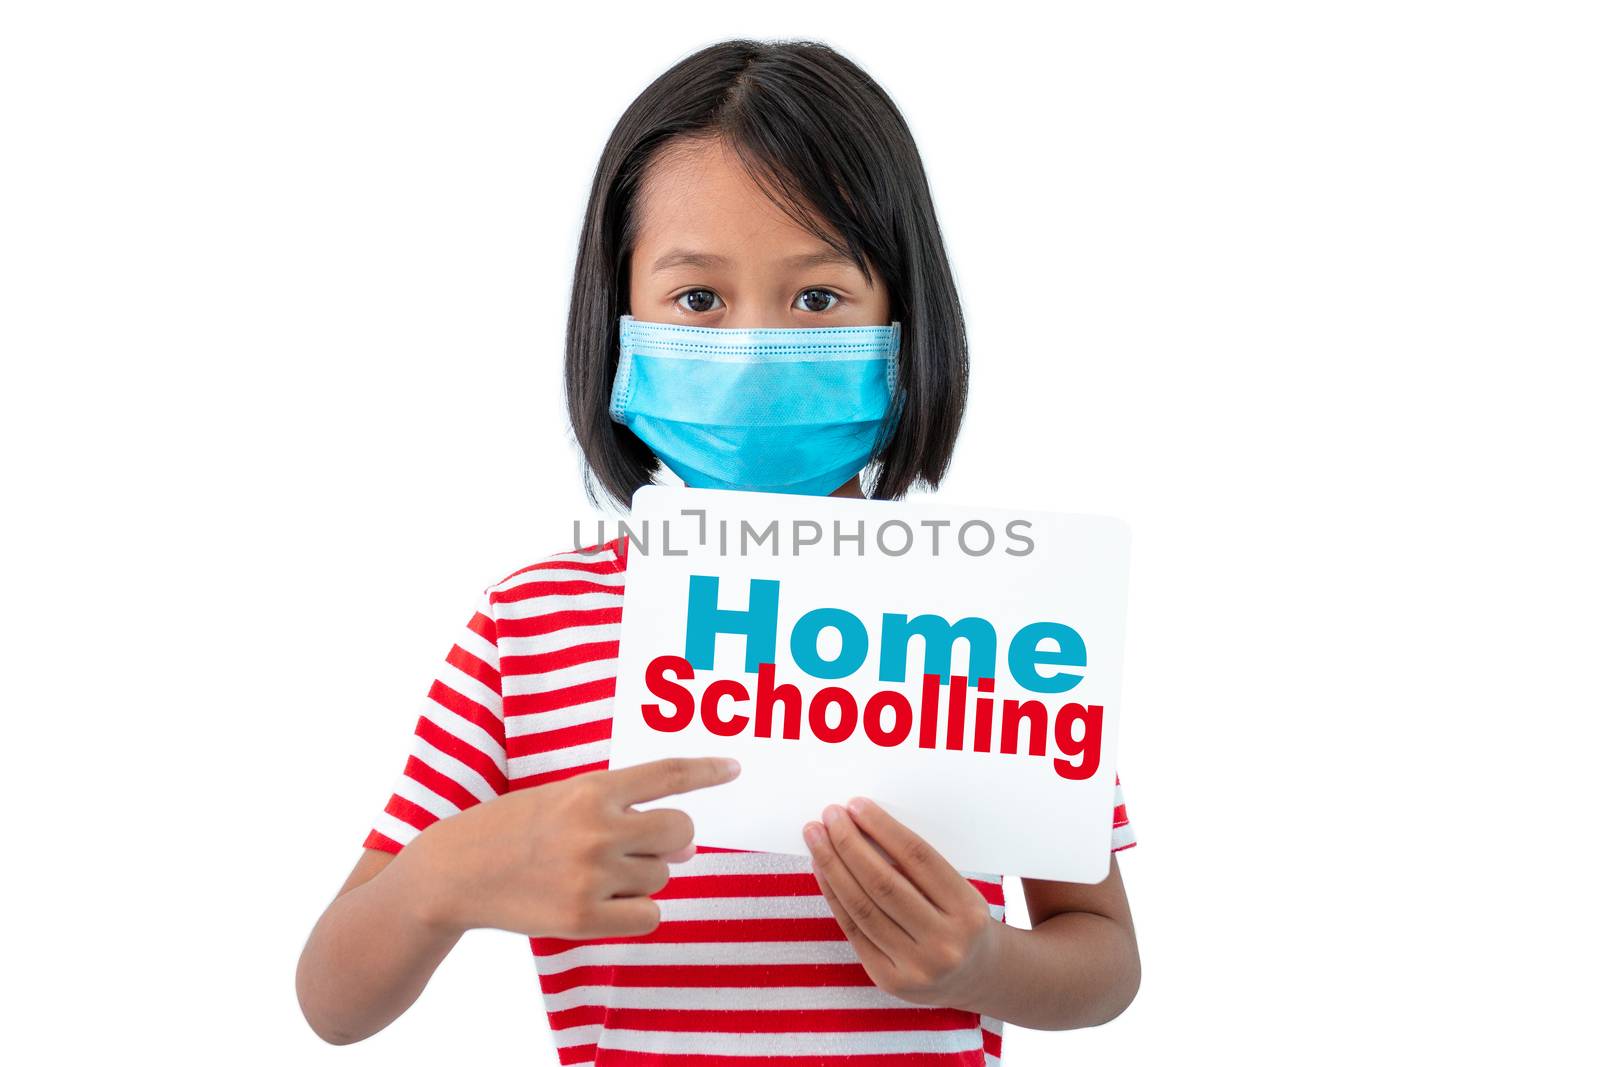 Coronavirus Outbreak. Lockdown and school closures. School girl in face mask holding a sign with the words "HOME SCHOOLING"